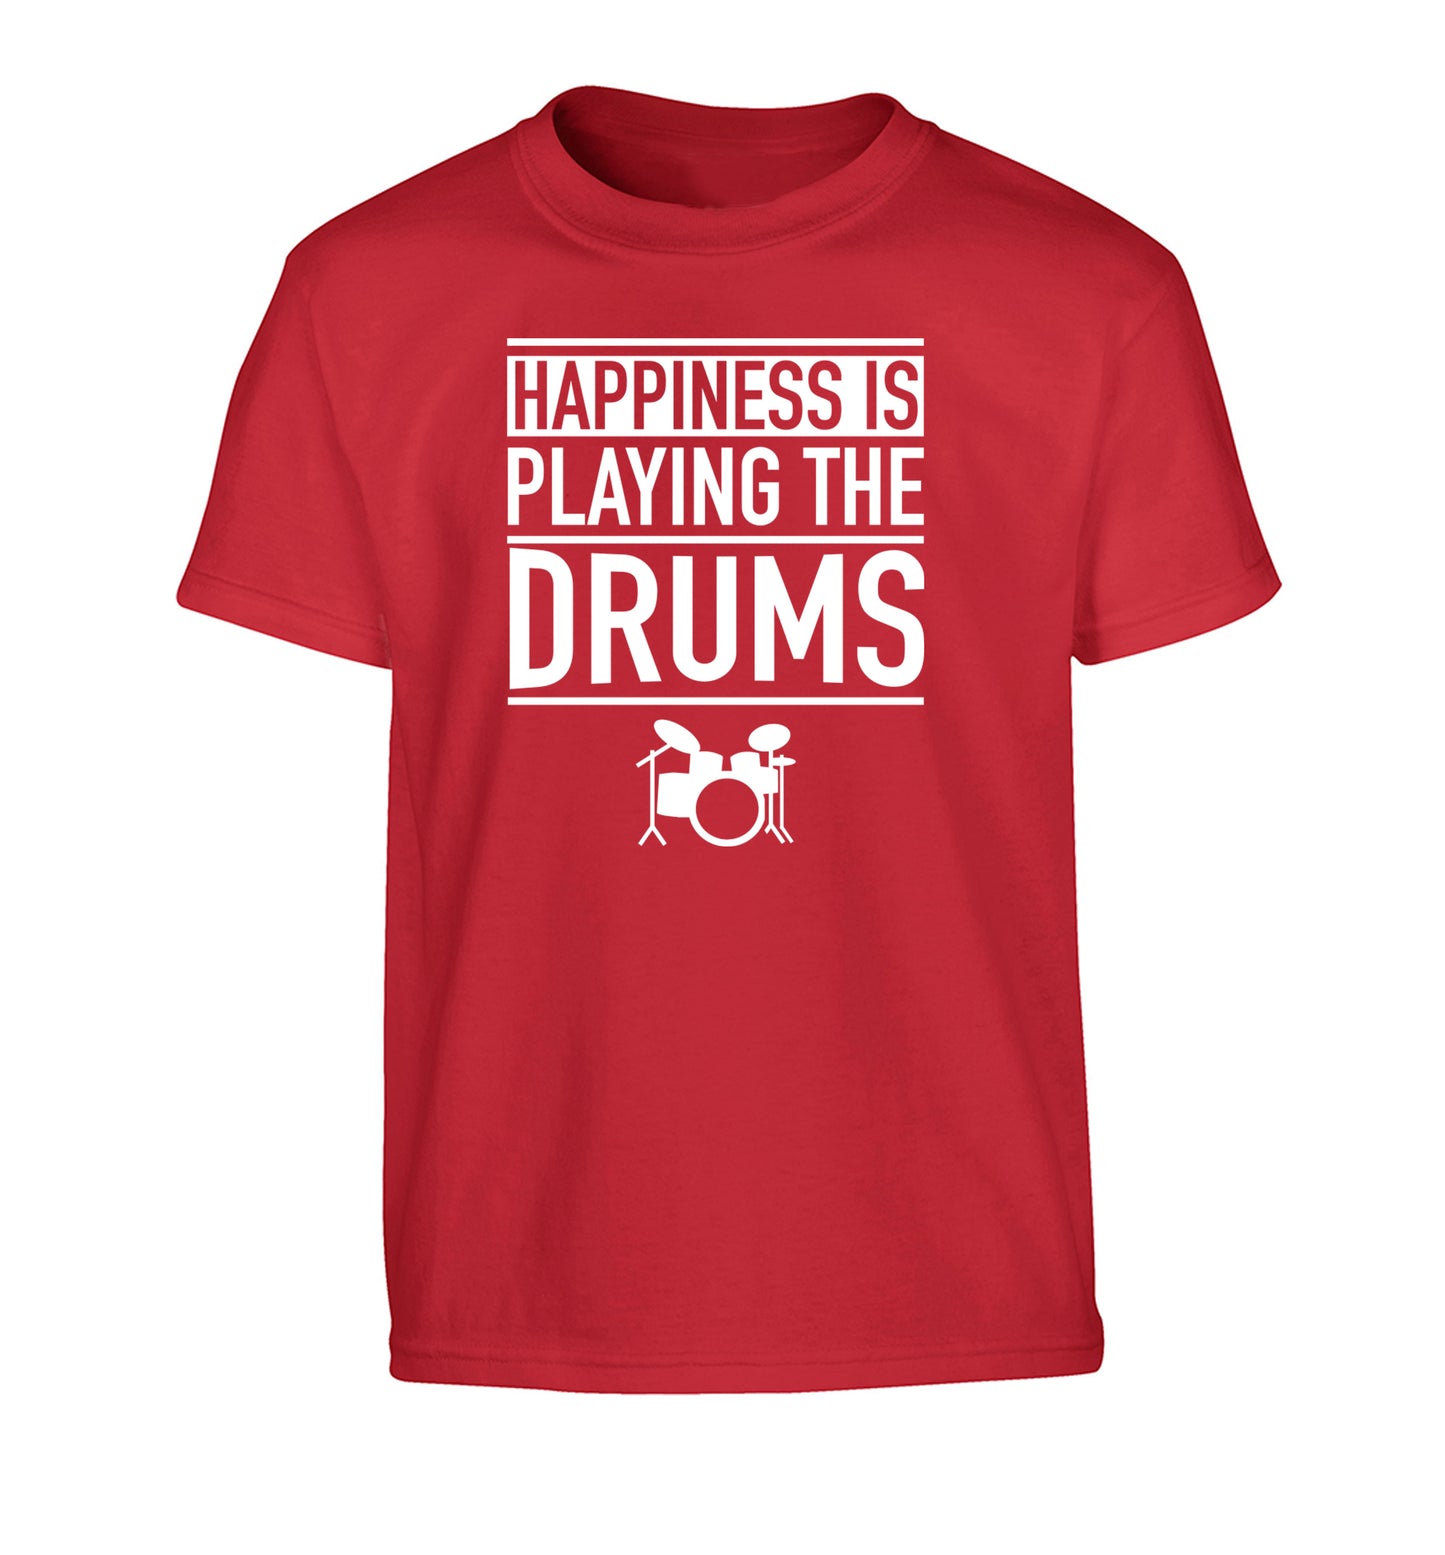 Happiness is playing the drums Children's red Tshirt 12-14 Years